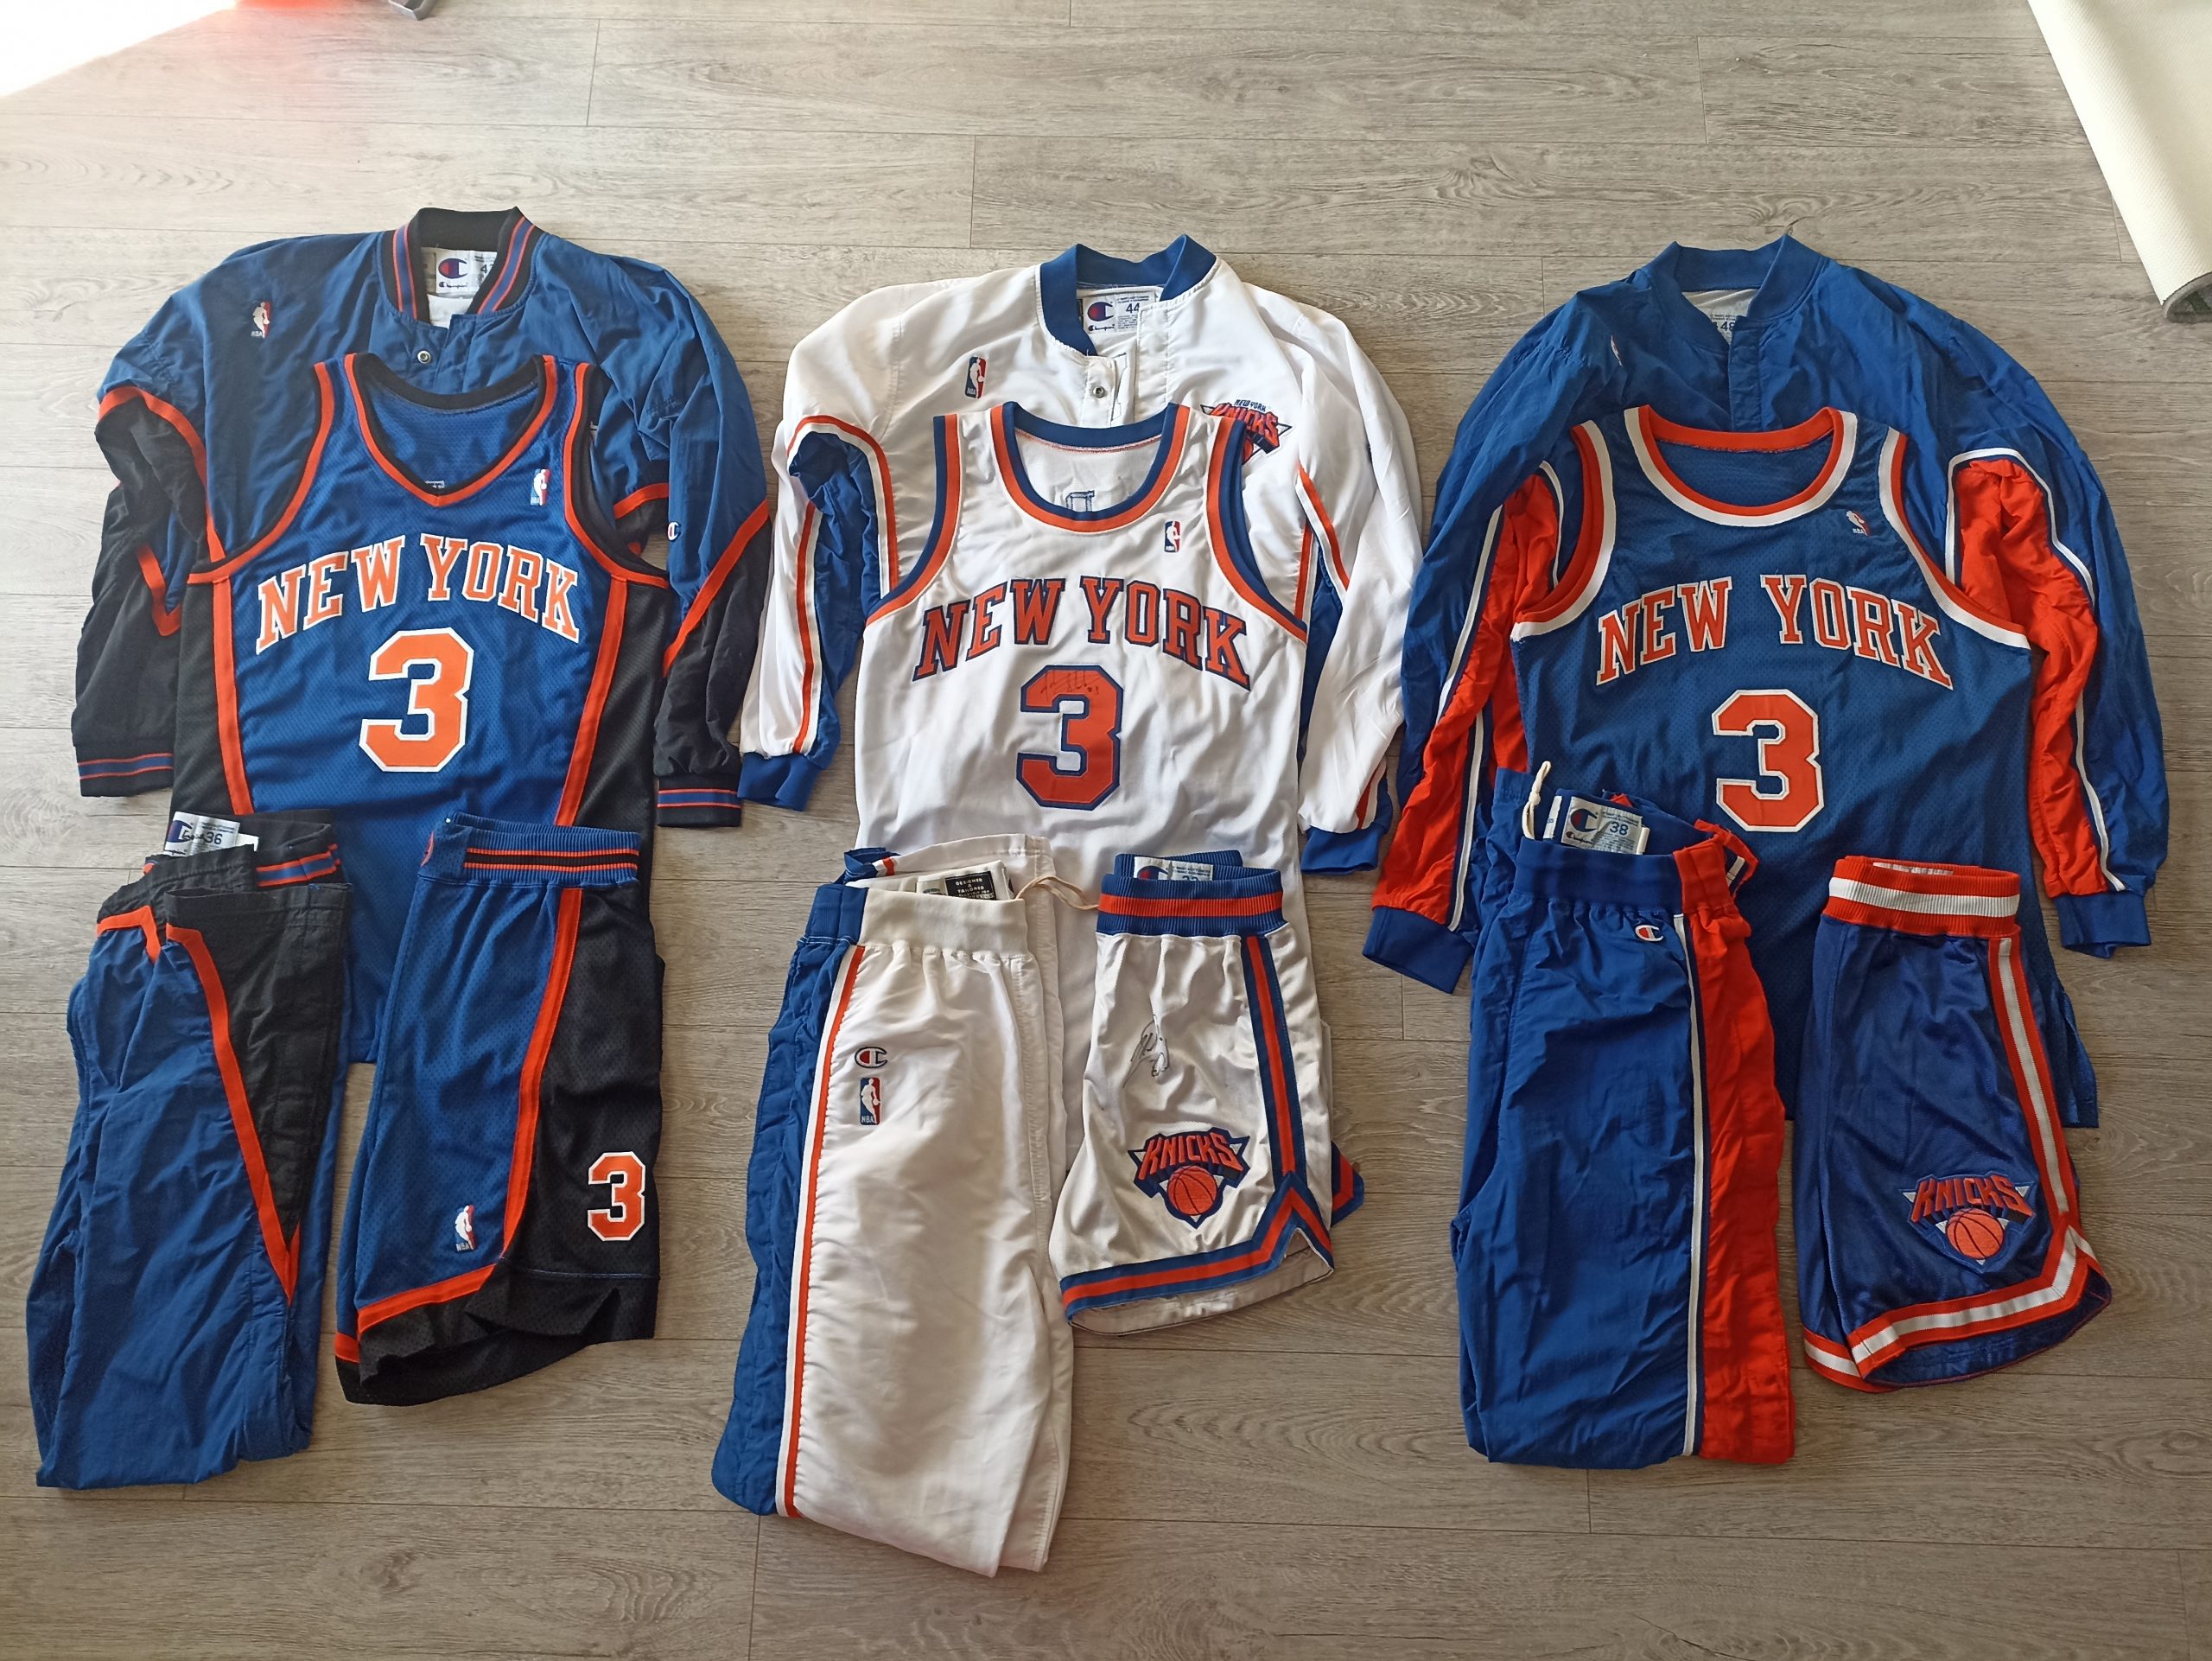 The Most Elite Hoop Collections Out There: From NBA Jerseys to Rare Jordans Game-Worn by Michael Jordan